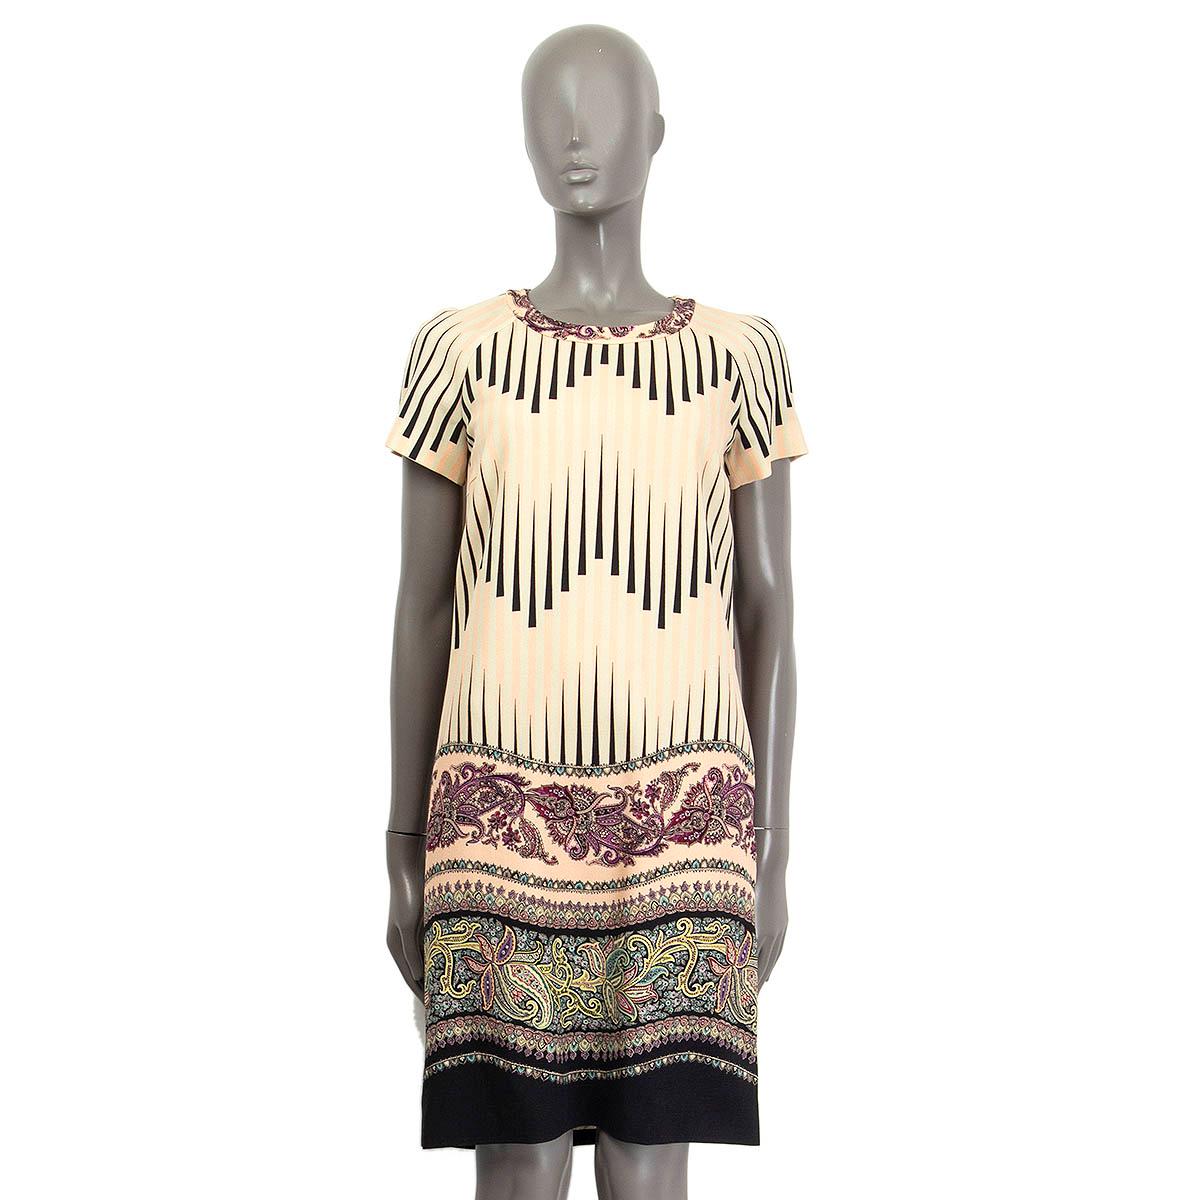 100% authentic Etro short sleeve striped dress in peach, black, mint, purple and turquoise wool (100%). Opens with a concealed zipper and a hook at the back. Lined in beige acetate (56%) and viscose (44%). Has been worn and is in excellent